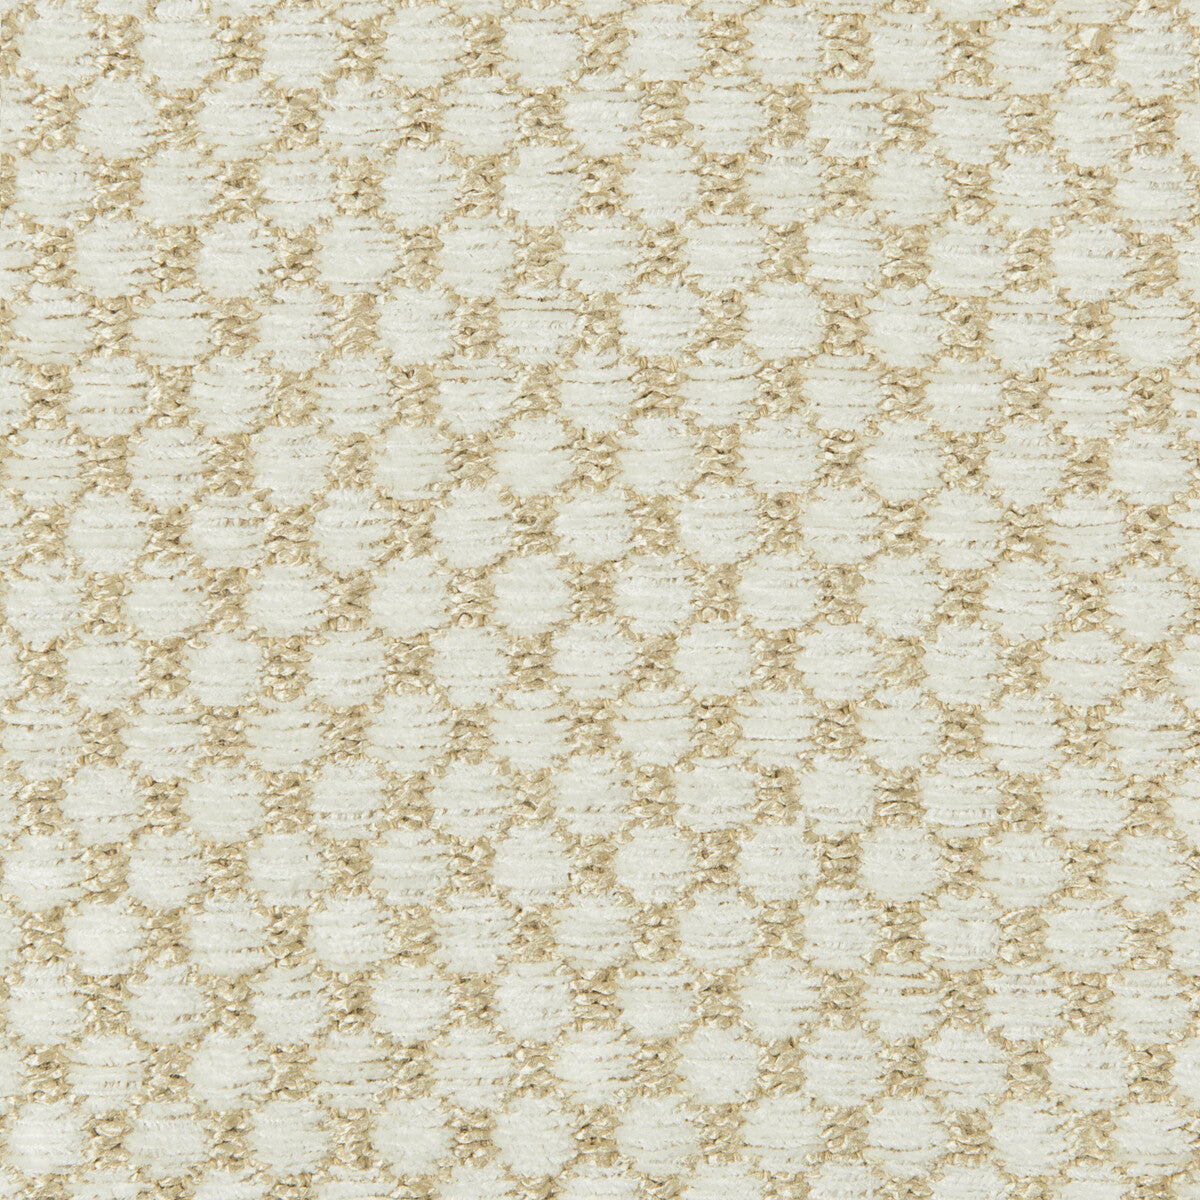 Ecrins Texture fabric in pearl color - pattern 8019147.1.0 - by Brunschwig &amp; Fils in the Chambery Textures II collection